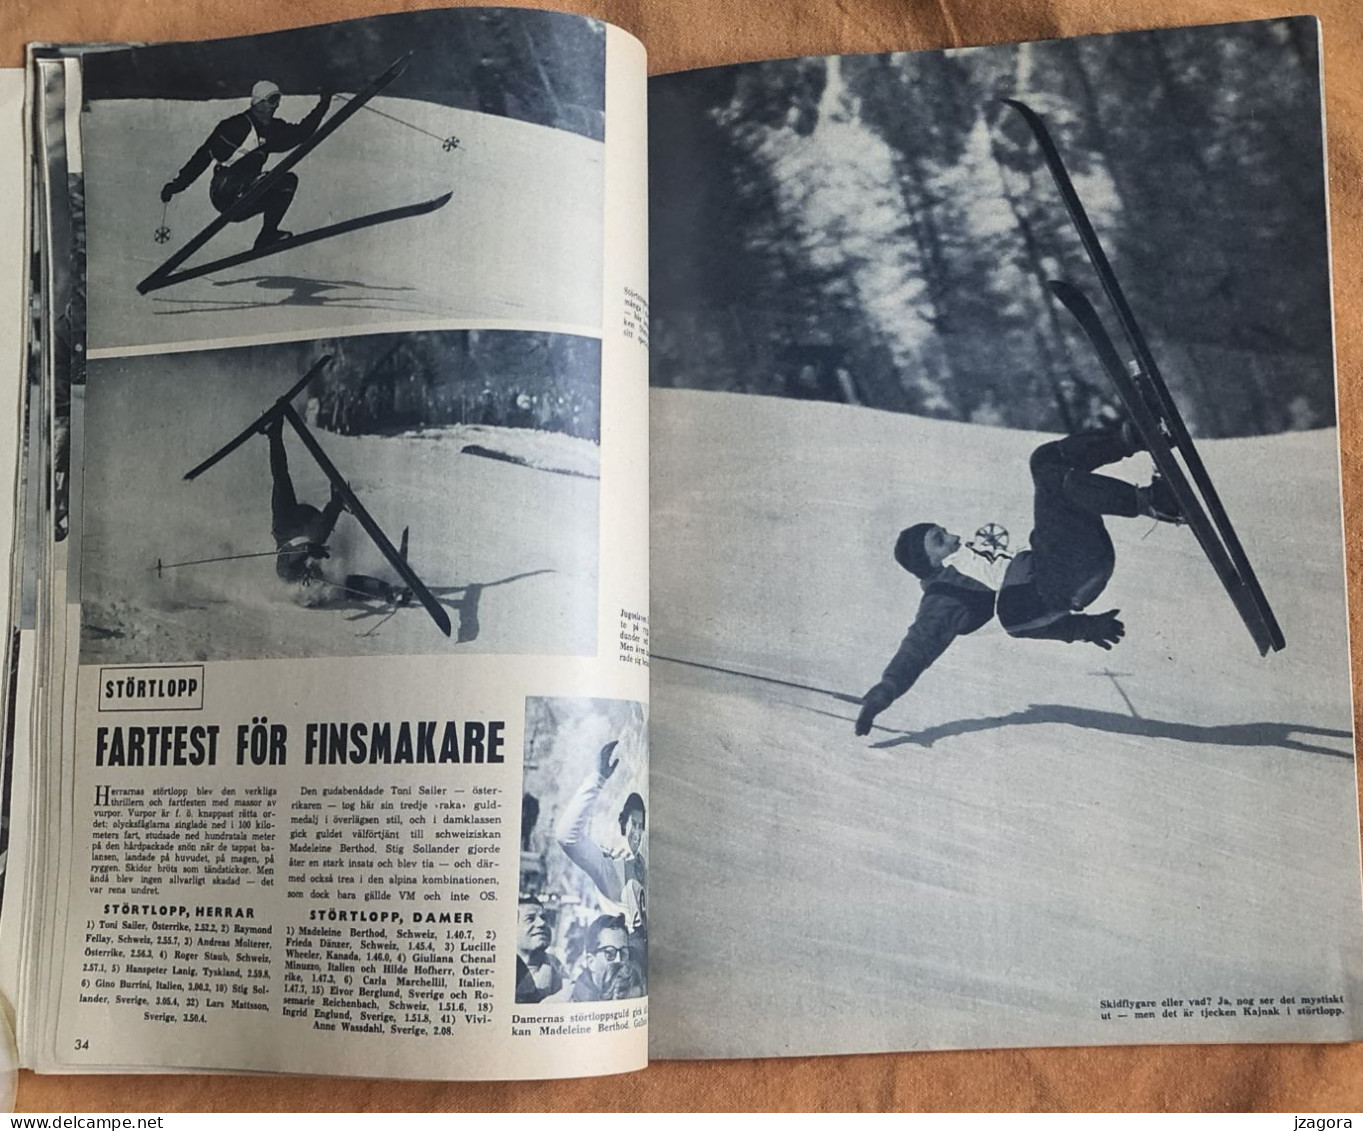 WINTER OLYMPIC GAMES OLYMPISCHE WINTERSPIELE JEUX OLYMPIQUES D'HIVER JUEGOS OLÍMPICOS DE INVIERNO 1956 CORTINA - Libri